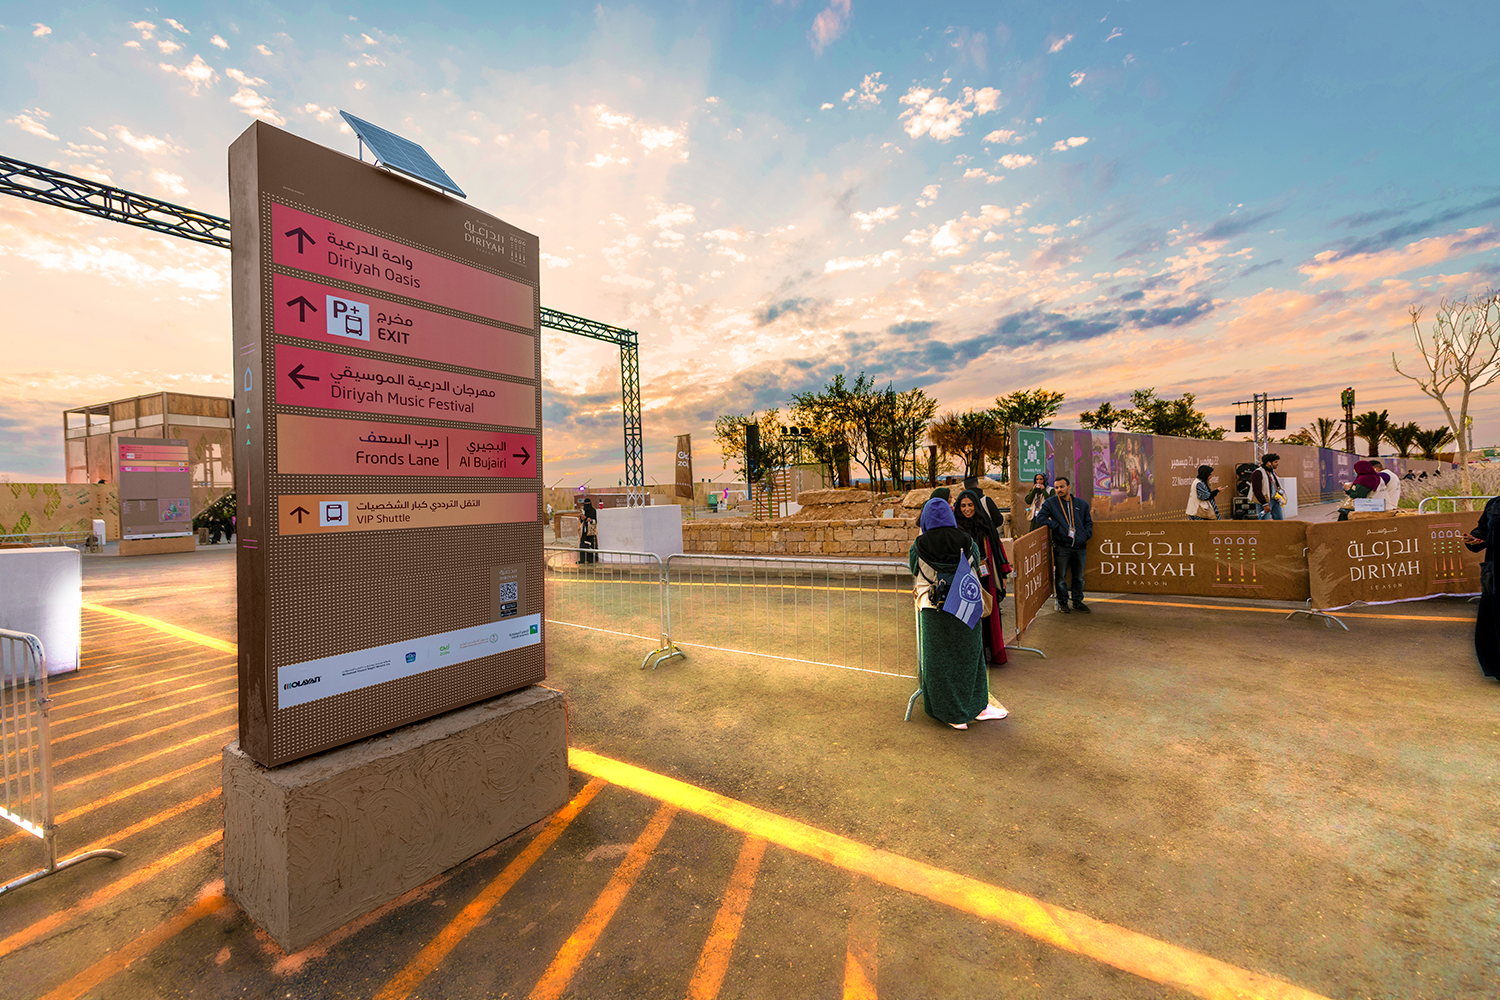 Mima's red and orange wayfinding signage, on a brown background, in place at Diriyah. Visitors and in the background and the sky is blue.